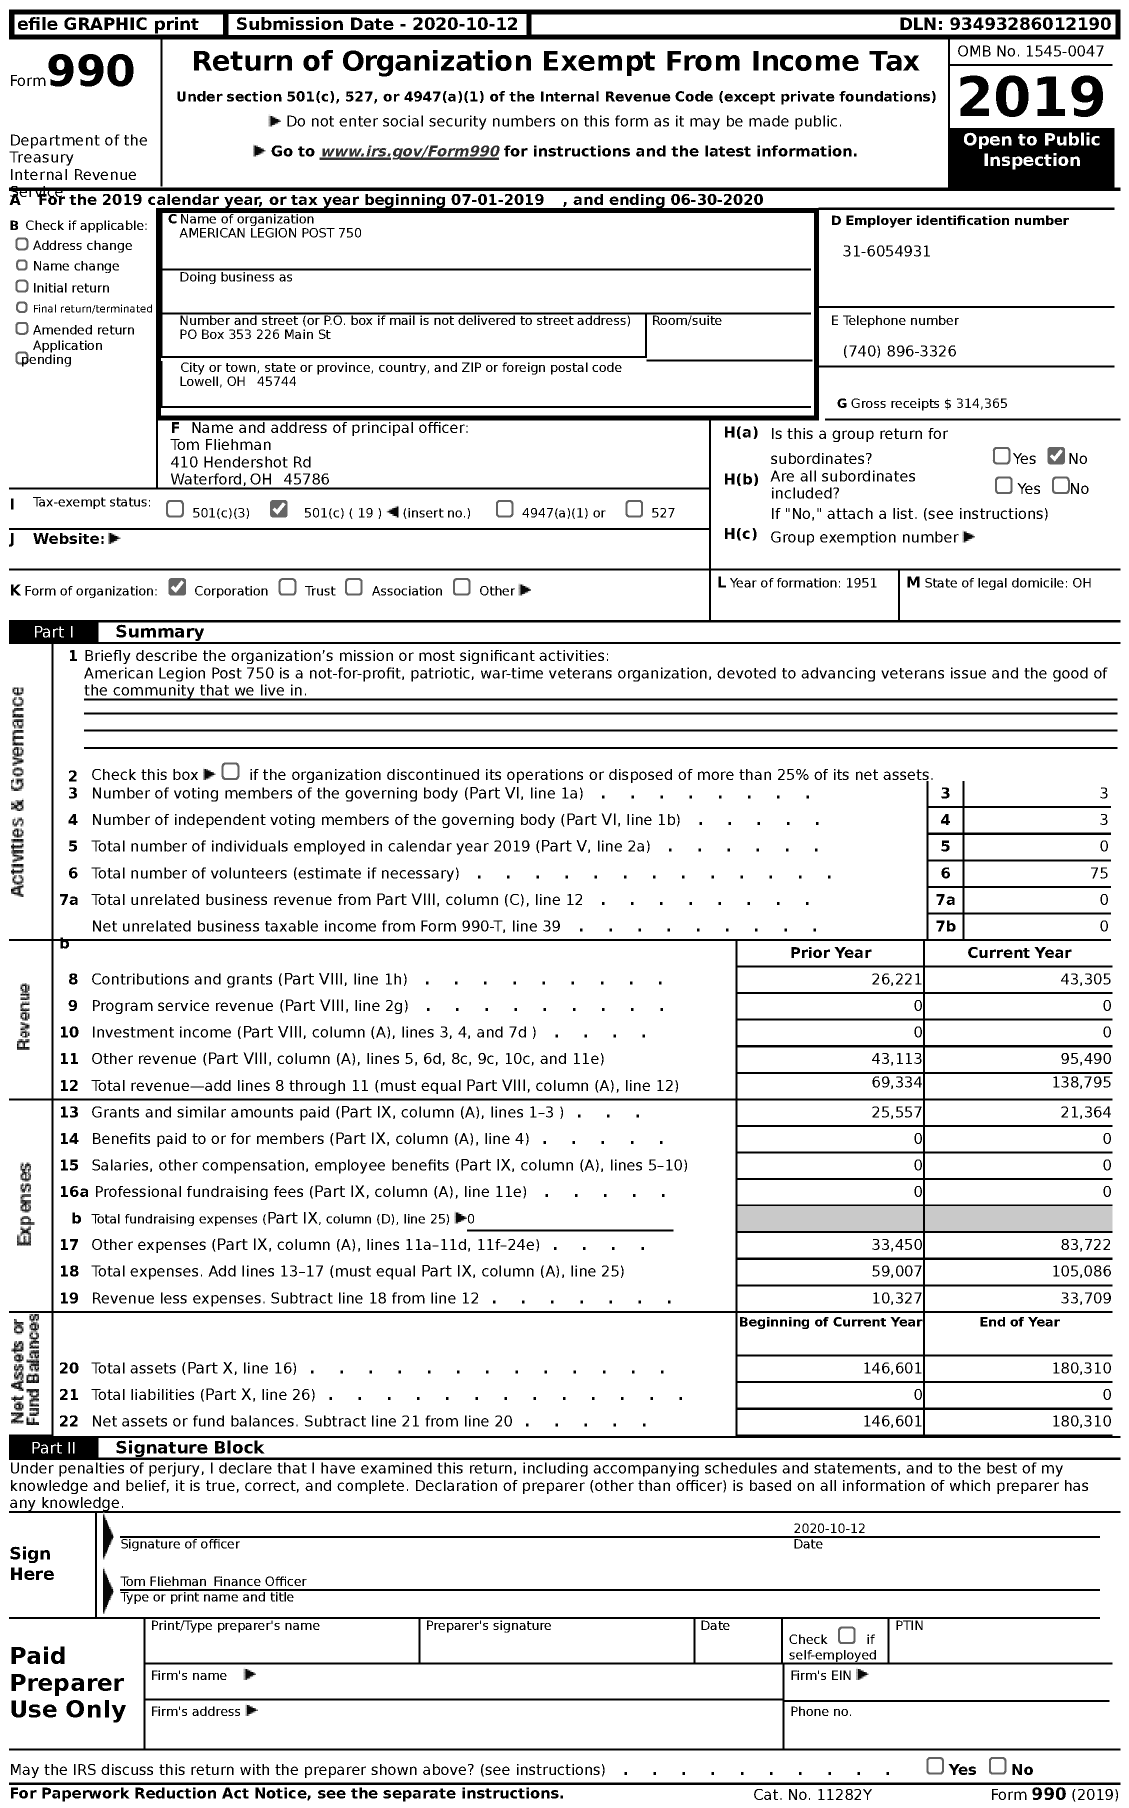 Image of first page of 2019 Form 990 for AMERICAN Legion - 0750 Lowell